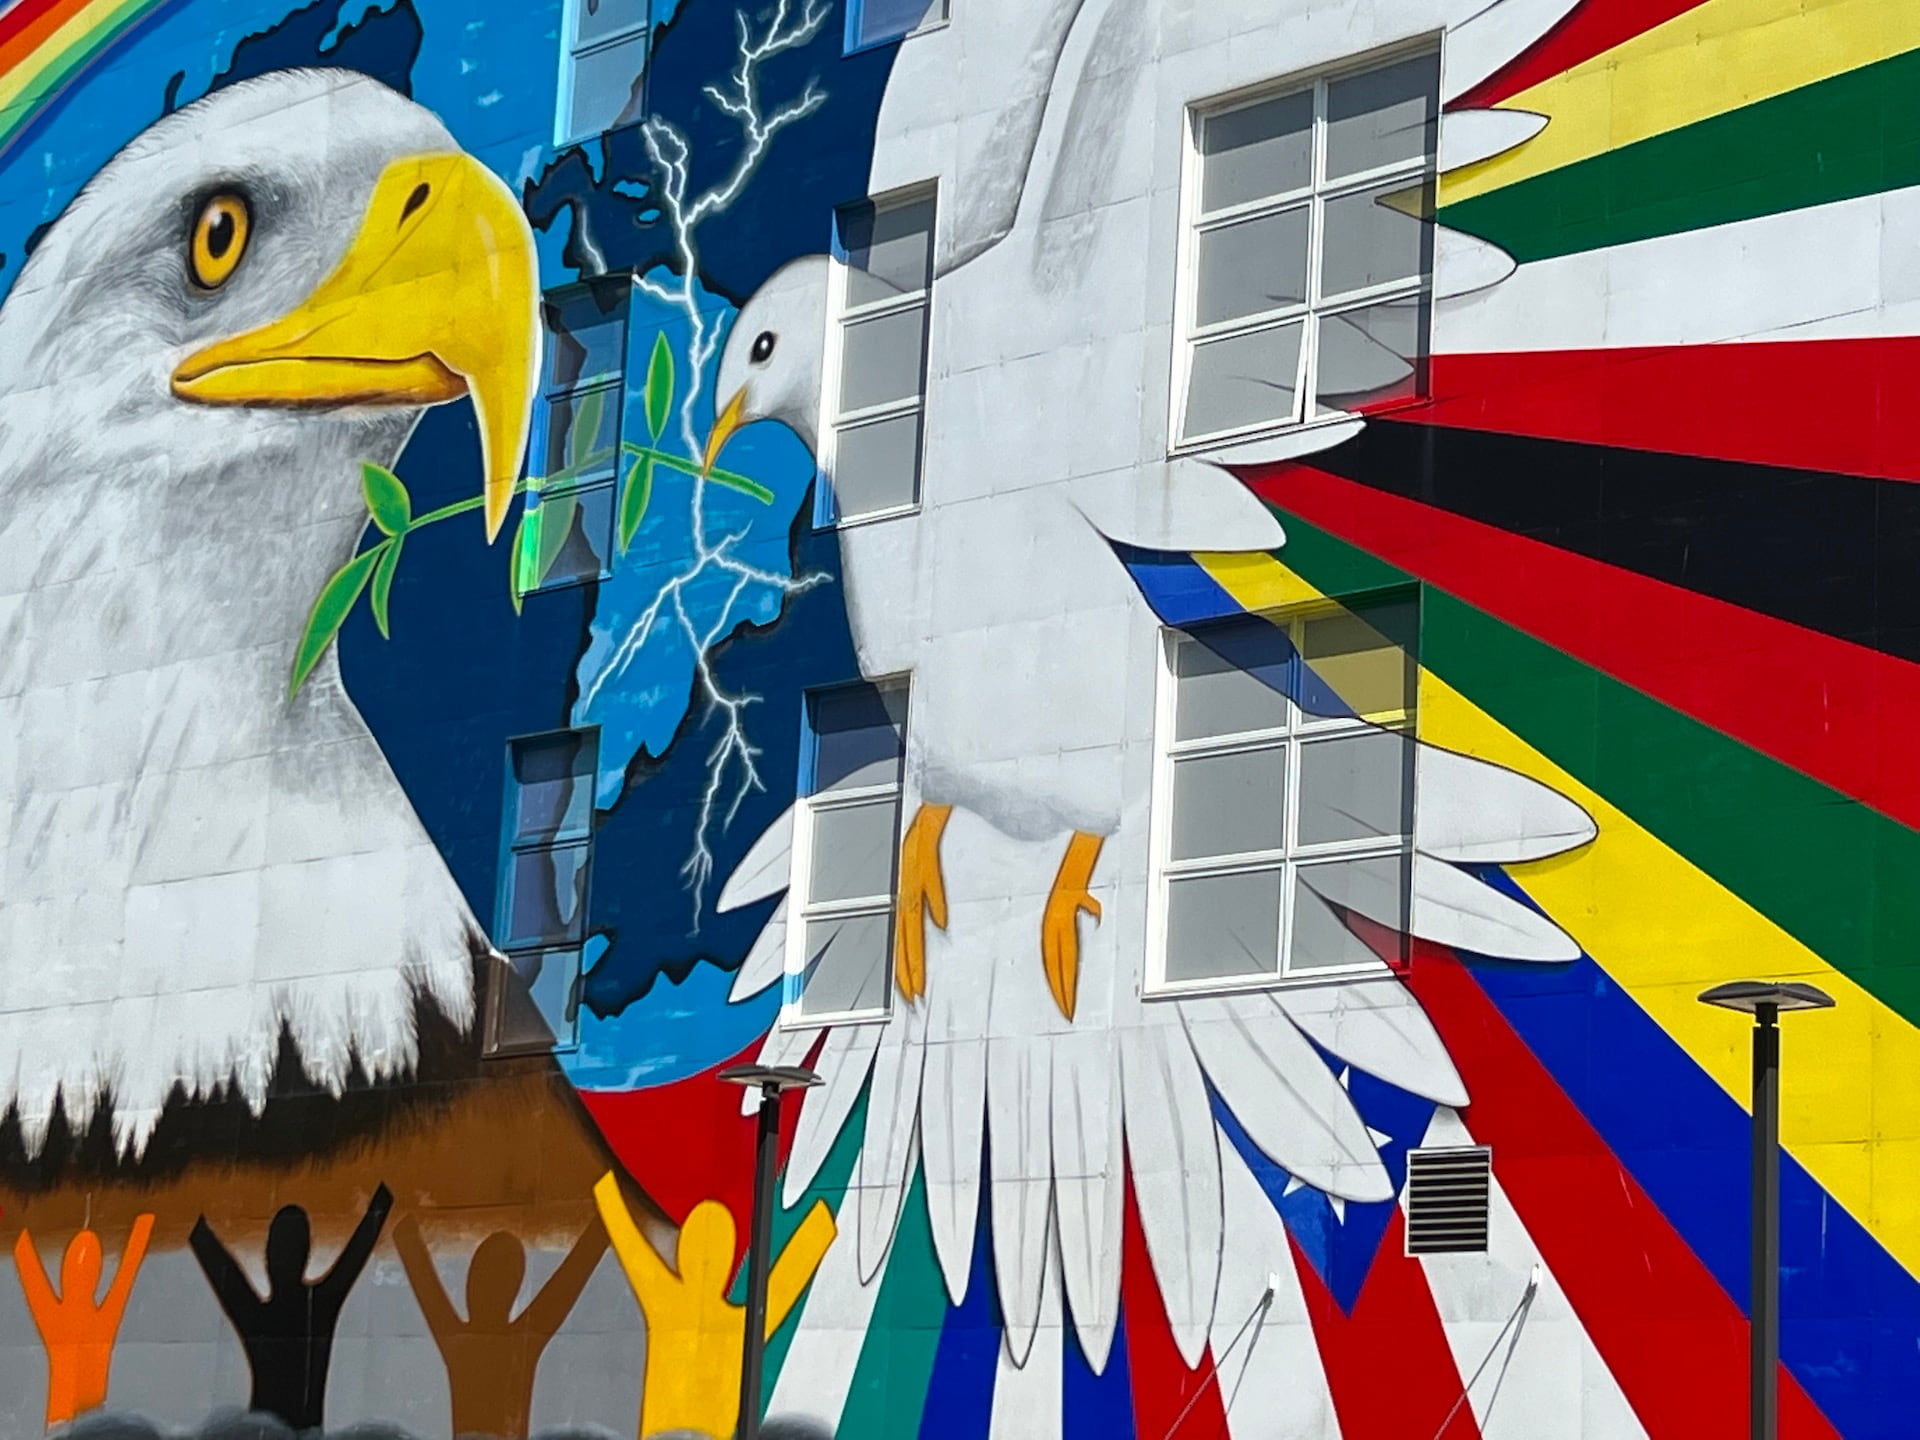 massive mural of bald eagle facing a dove with an olive branch, a globe backdrop, and multicolored stick figures holding their arms up in celebration.